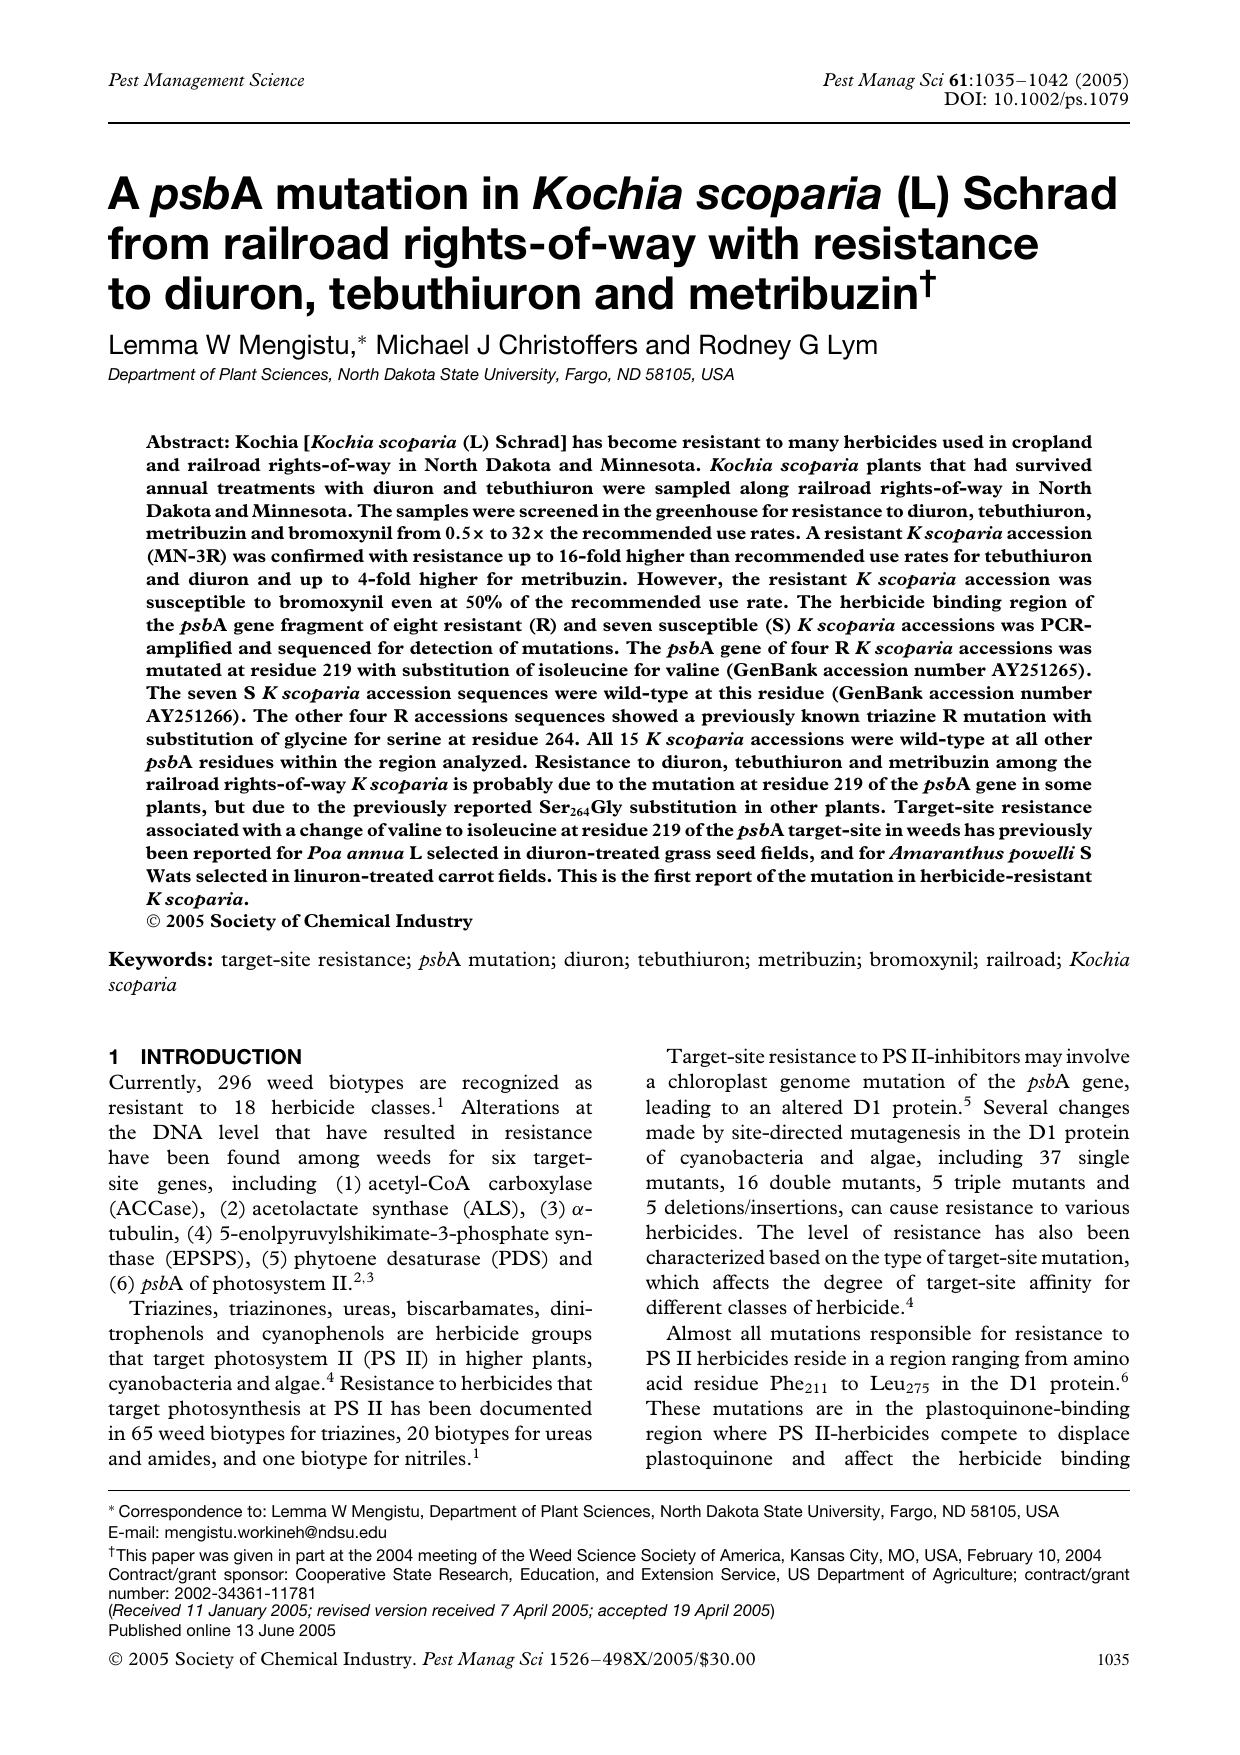 A psbA mutation in Kochia scoparia (L) Schrad from railroad rights-of-way with resistance to diuron, tebuthiuron and metribuzin by Unknown